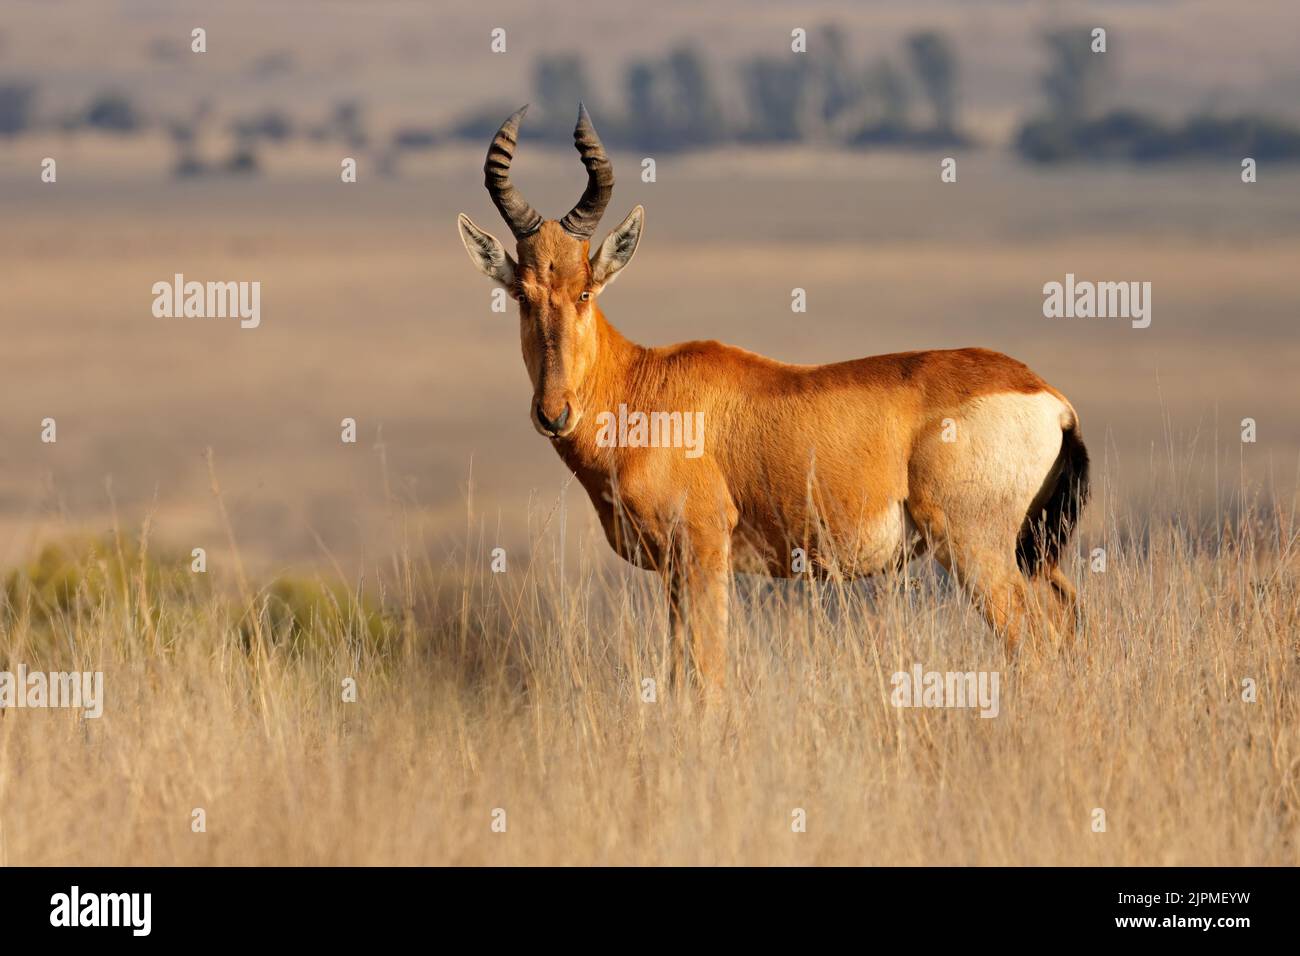 A red hartebeest (Alcelaphus buselaphus) standing in open grassland, South Africa Stock Photo